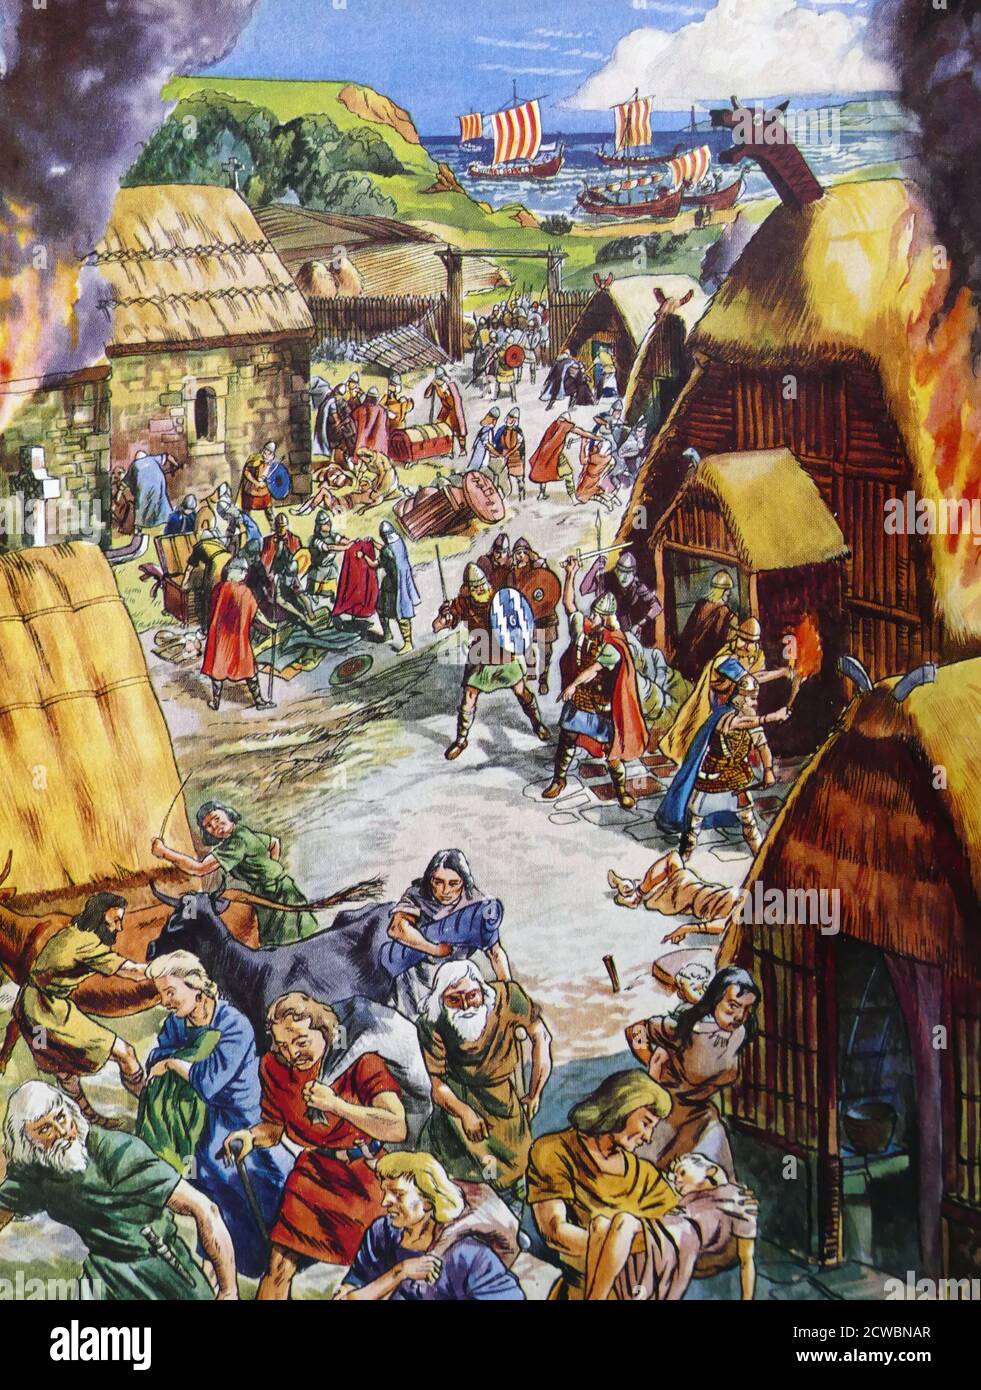 Illustration depicting a Viking raid on an English coastal village. Vikings were Scandinavians, who from the late 8th to late 11th centuries, raided and traded from their Northern European homelands across wide areas of Europe, and explored westwards to Iceland, Greenland, and Vinland. Stock Photo